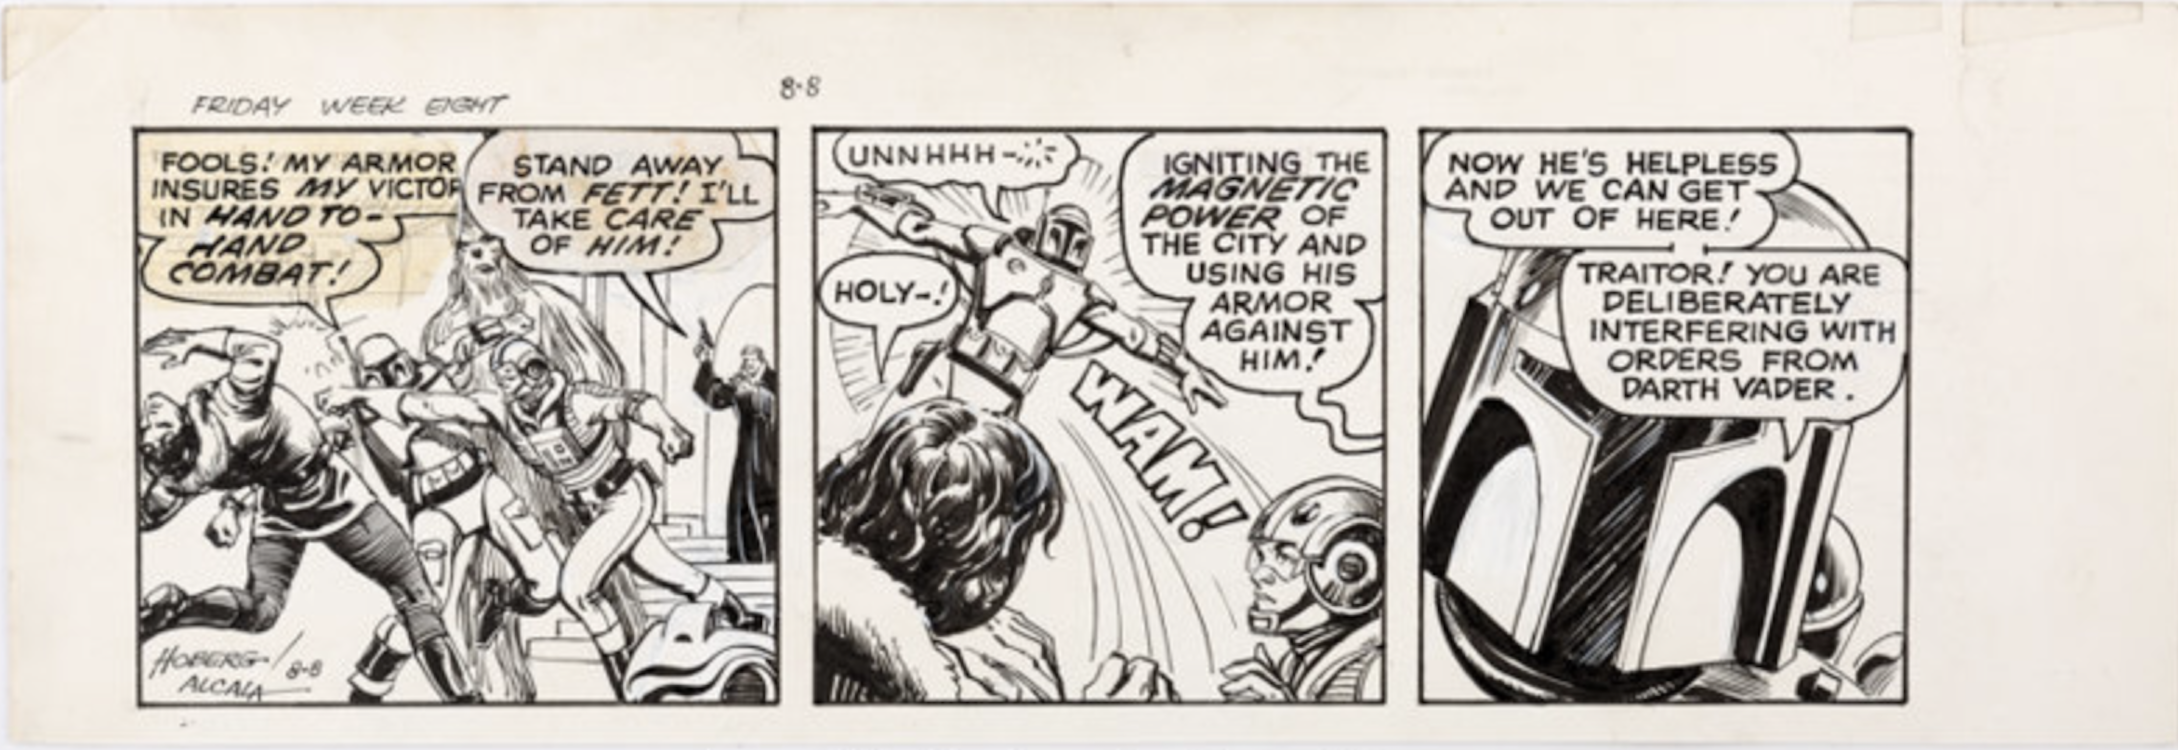 Star Wars Daily Comic Strip 8-8-80 by Rick Hoberg sold for $2,150. Click here to get your original art appraised.